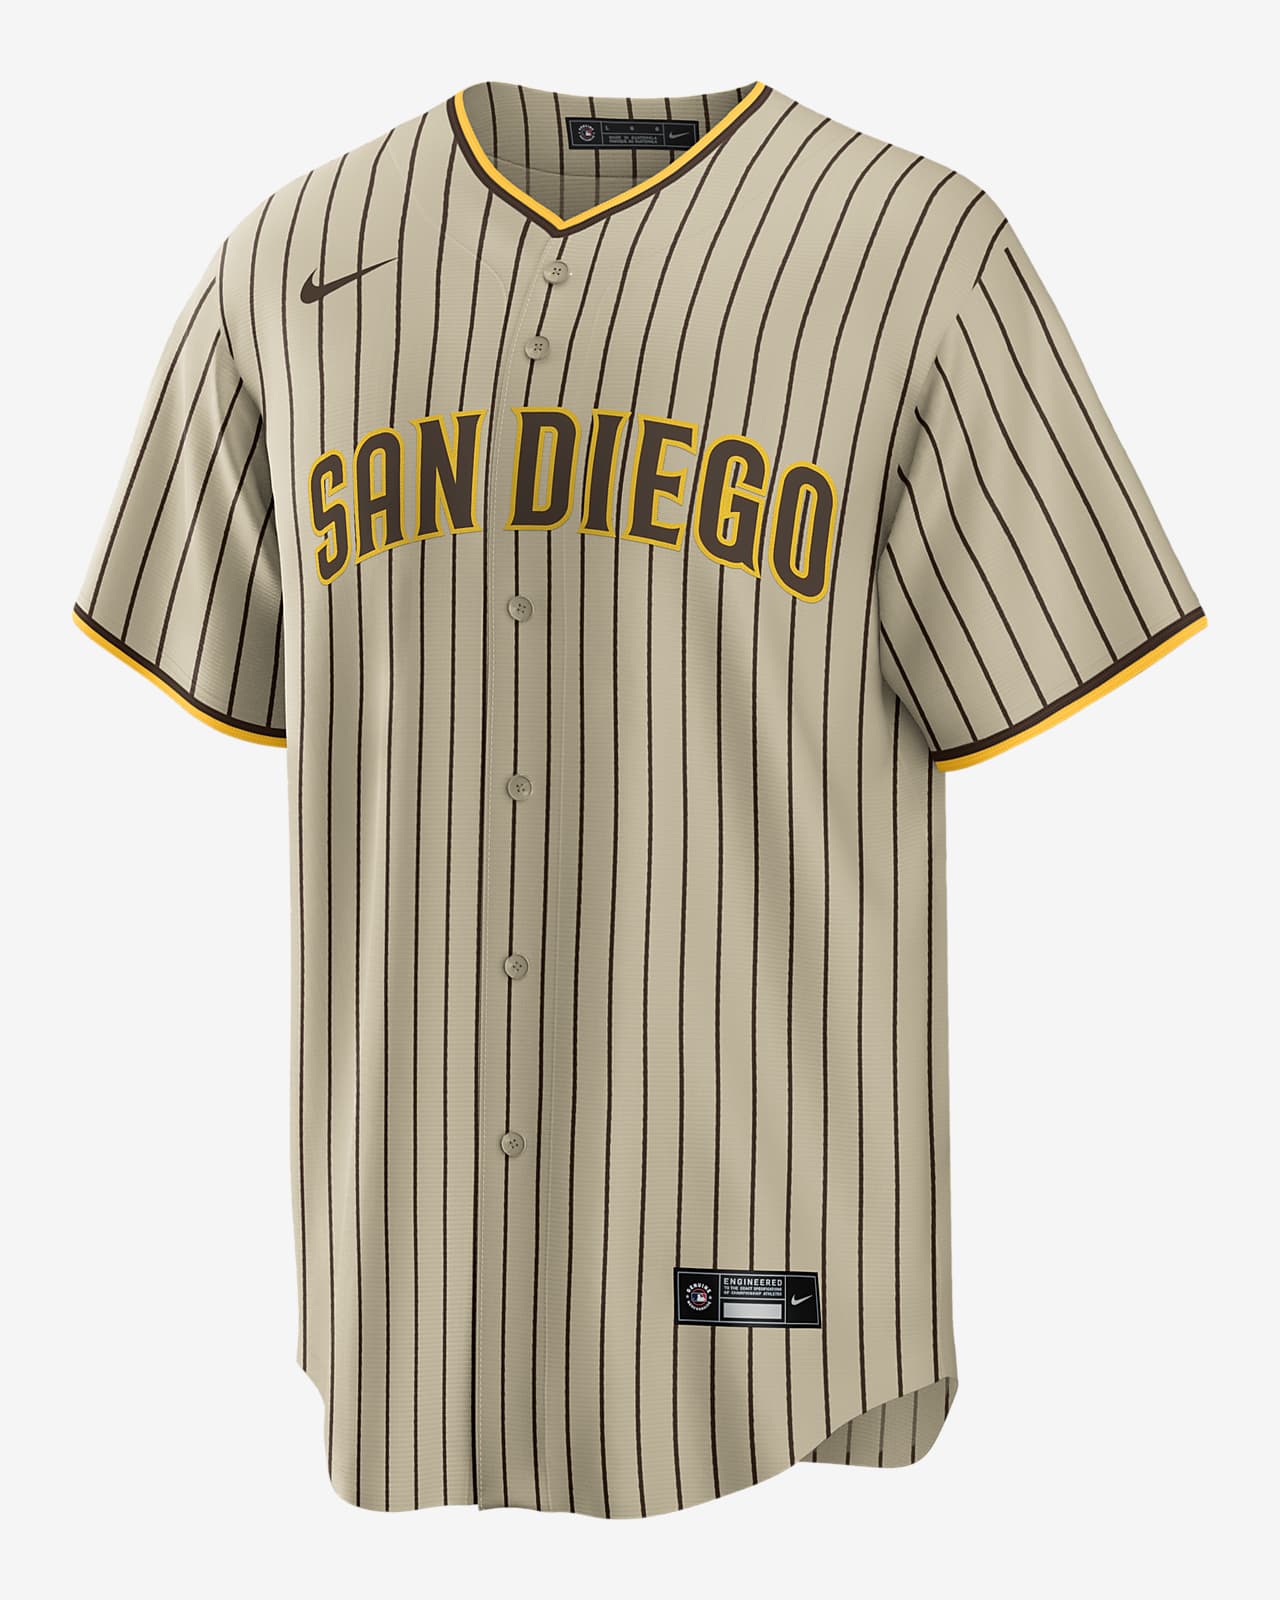 sd padres uniforms today